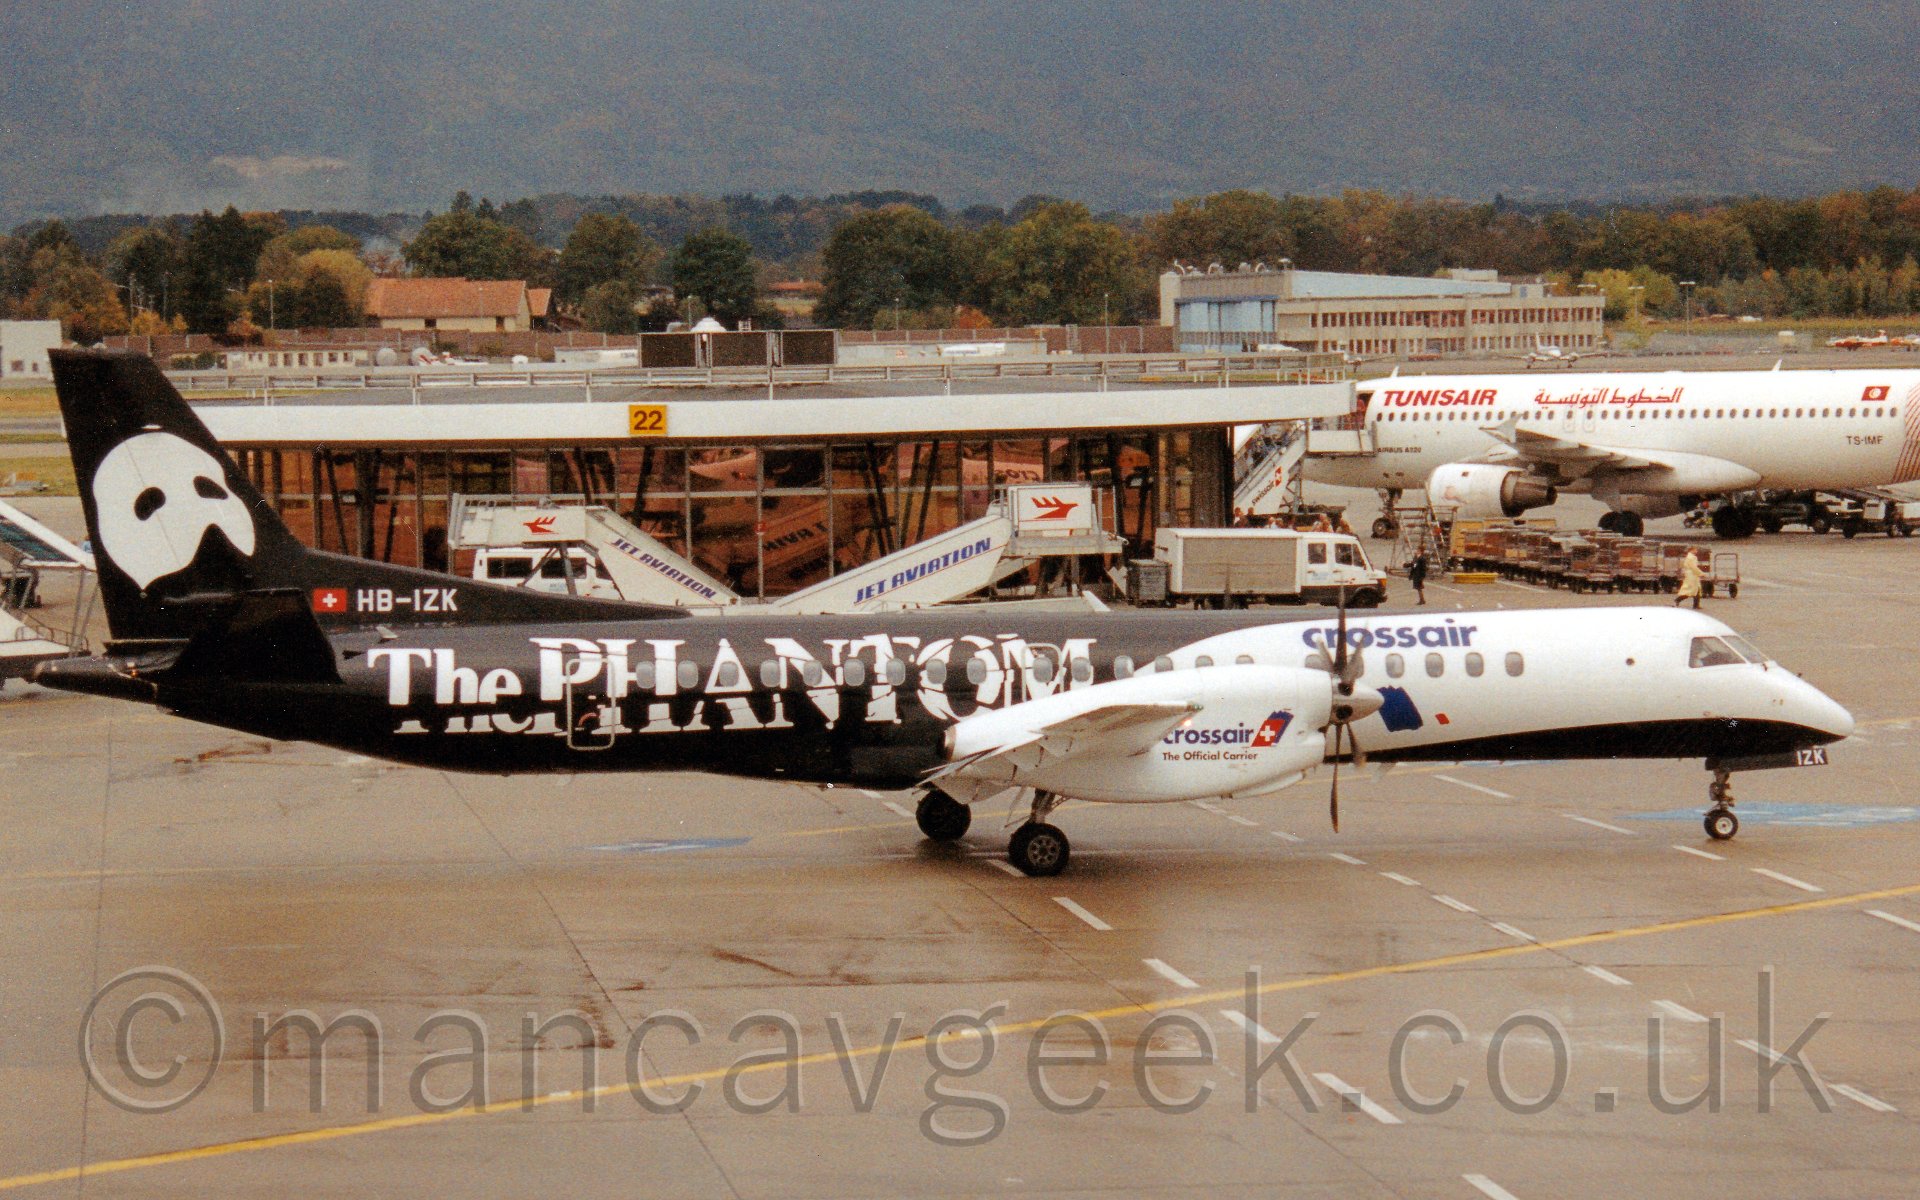 Side view of a twin propellor engined air liner taxiing from left to right. The plane is mostly black, with a large white area on the forward fuselage, with blue "Crossair" titles over the cabin windows towards the front. The rear fuselage has white "The Phantom" titles in a fractured font, while the tail has a white half-face mask. The wing-mounted engines are white, with "crossair" titles. behind the plane is a circular teminal building, with a white twin-engined jet airliner parked on the left, facing away from the camera, with "Tunisair" titles on the forward fuselage. In the background, trees run in to the distance, running up the side of a mountain towards the rear.